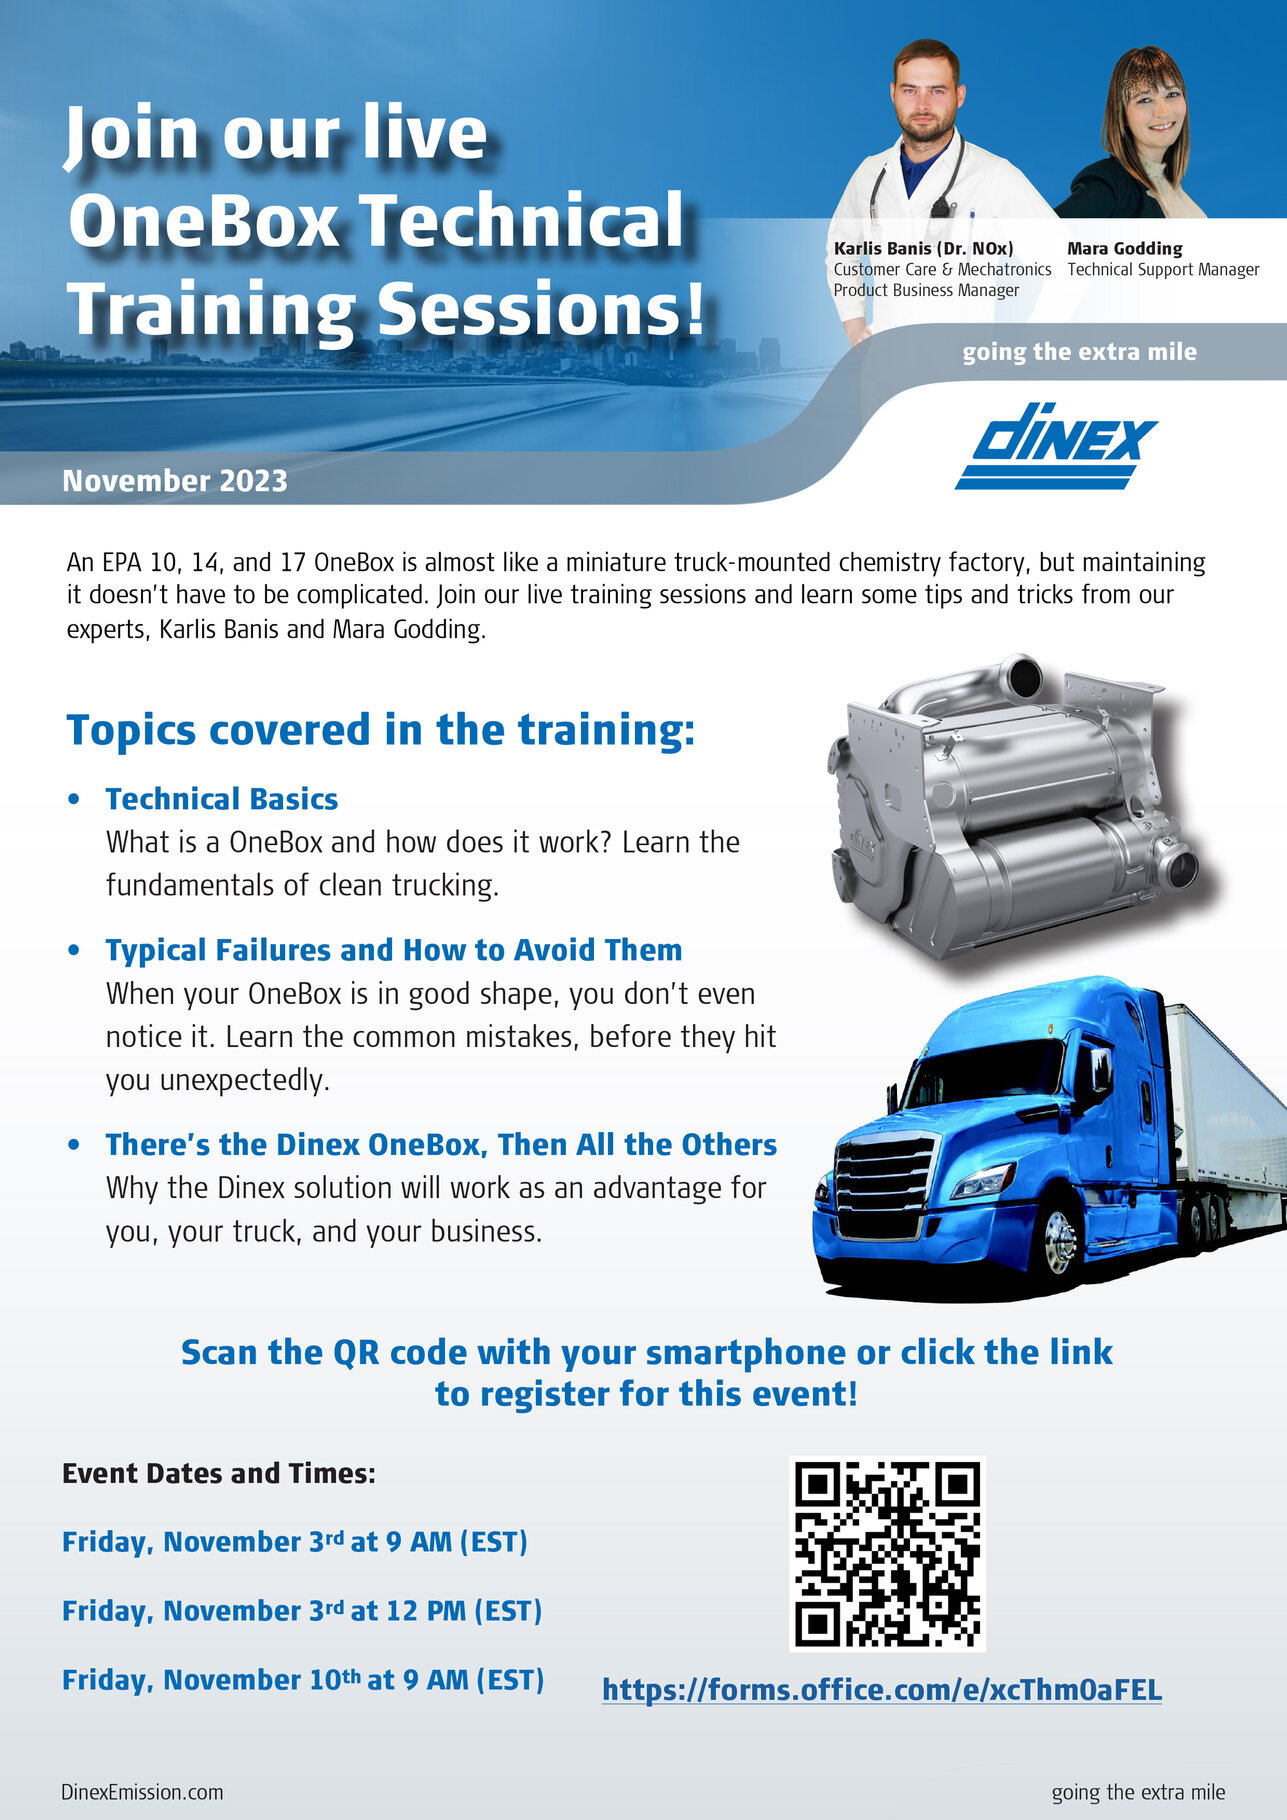 Elevate Your Technical Expertise with Dinex OneBox LIVE Training Sessions!